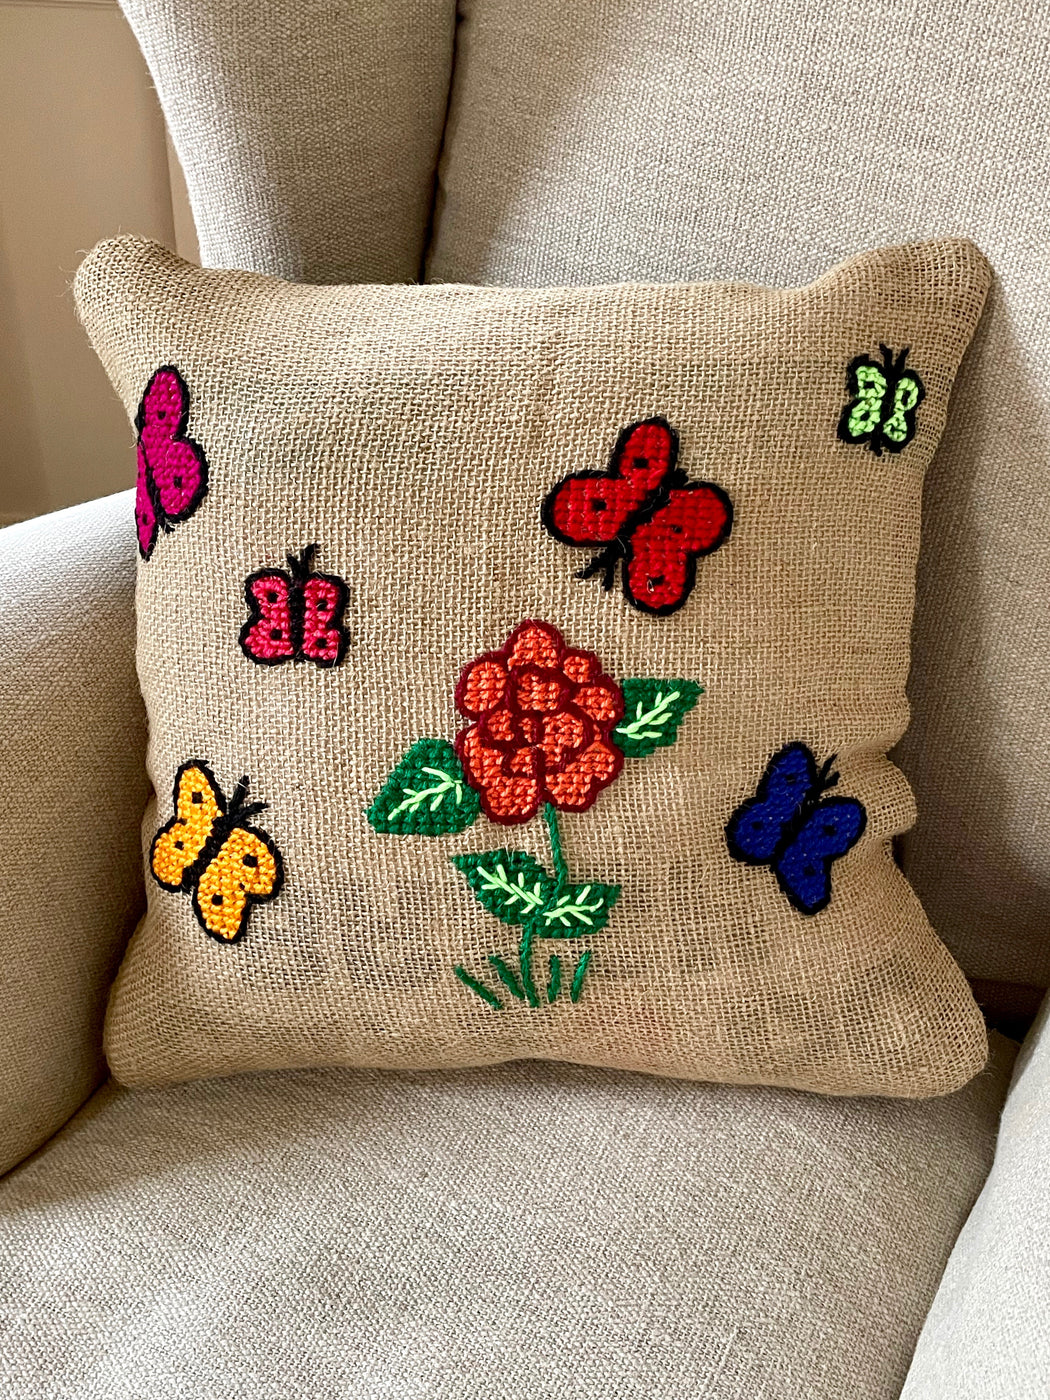 "Butterflies" Hand-Embroidered Pillow by Nathalie Lete